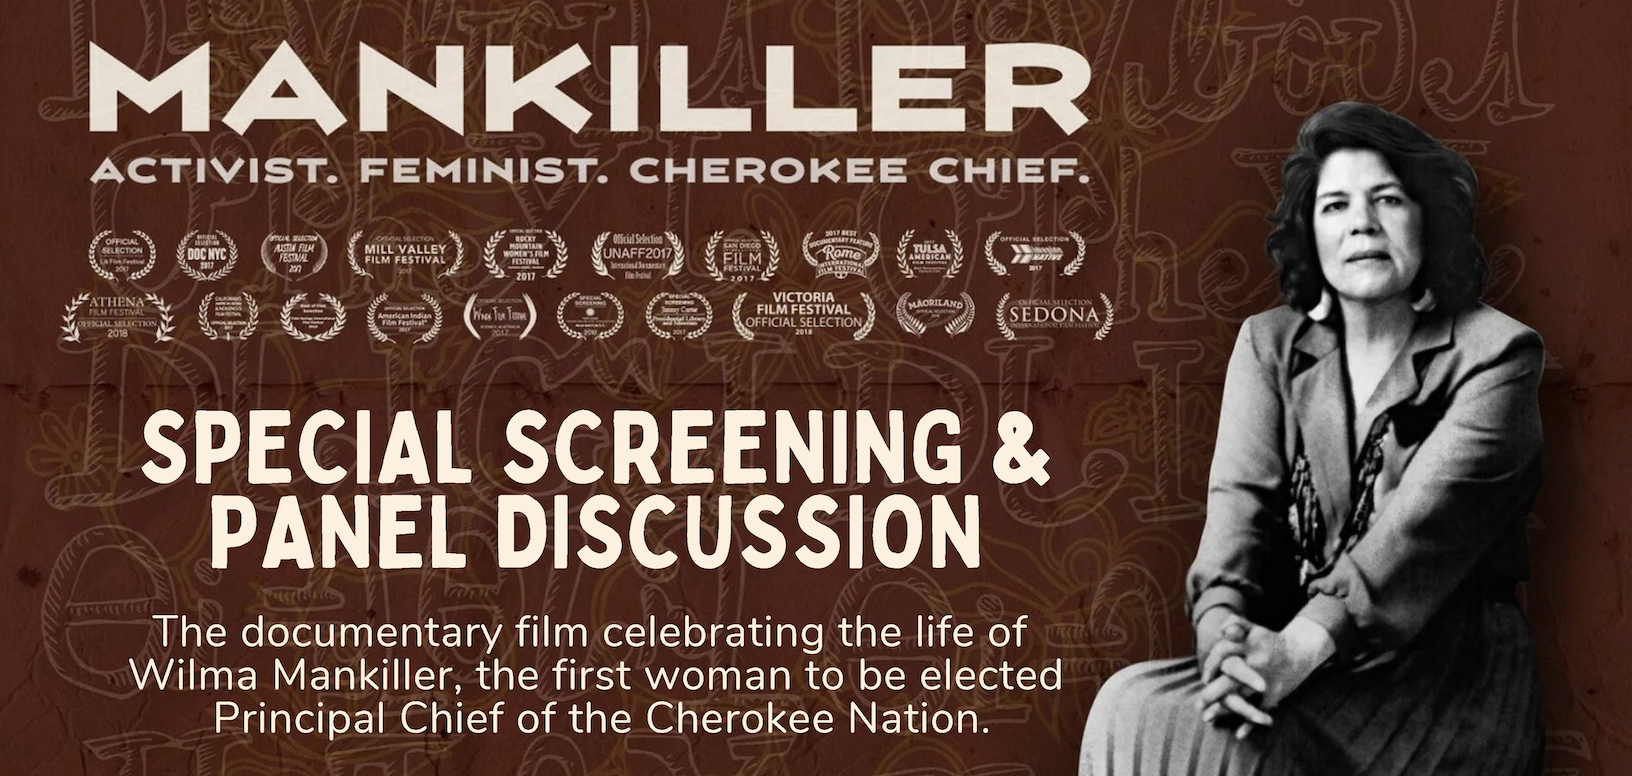 Image of Wilma Mankiller seated, with title of event.